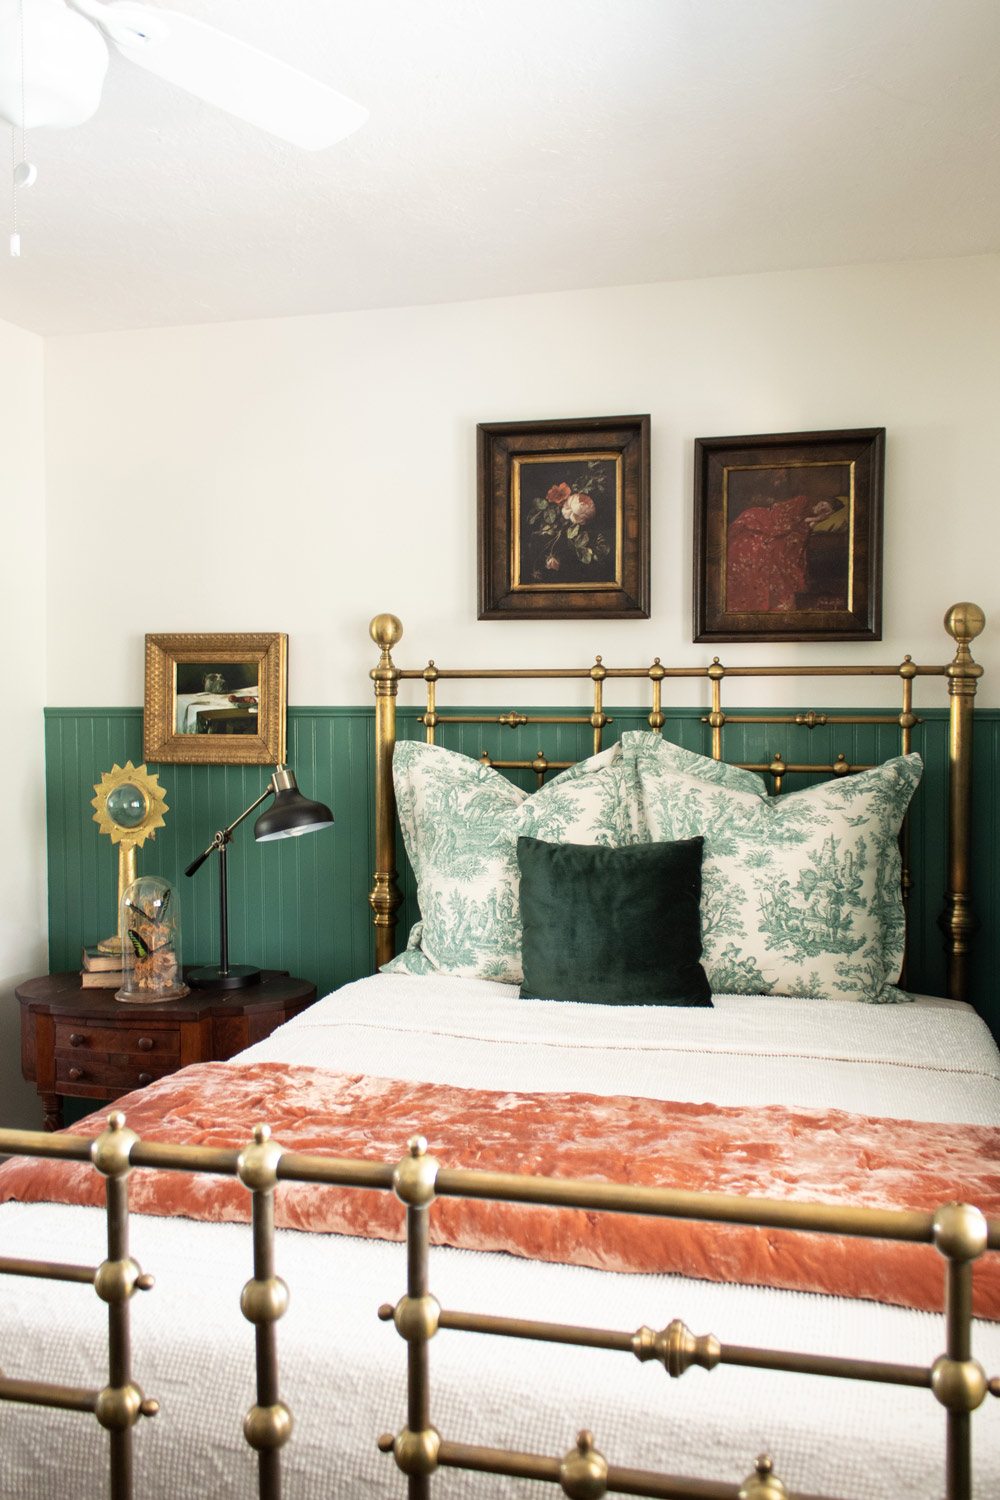 A decorated white room with a green beadboard, bed frame and three picture frames.